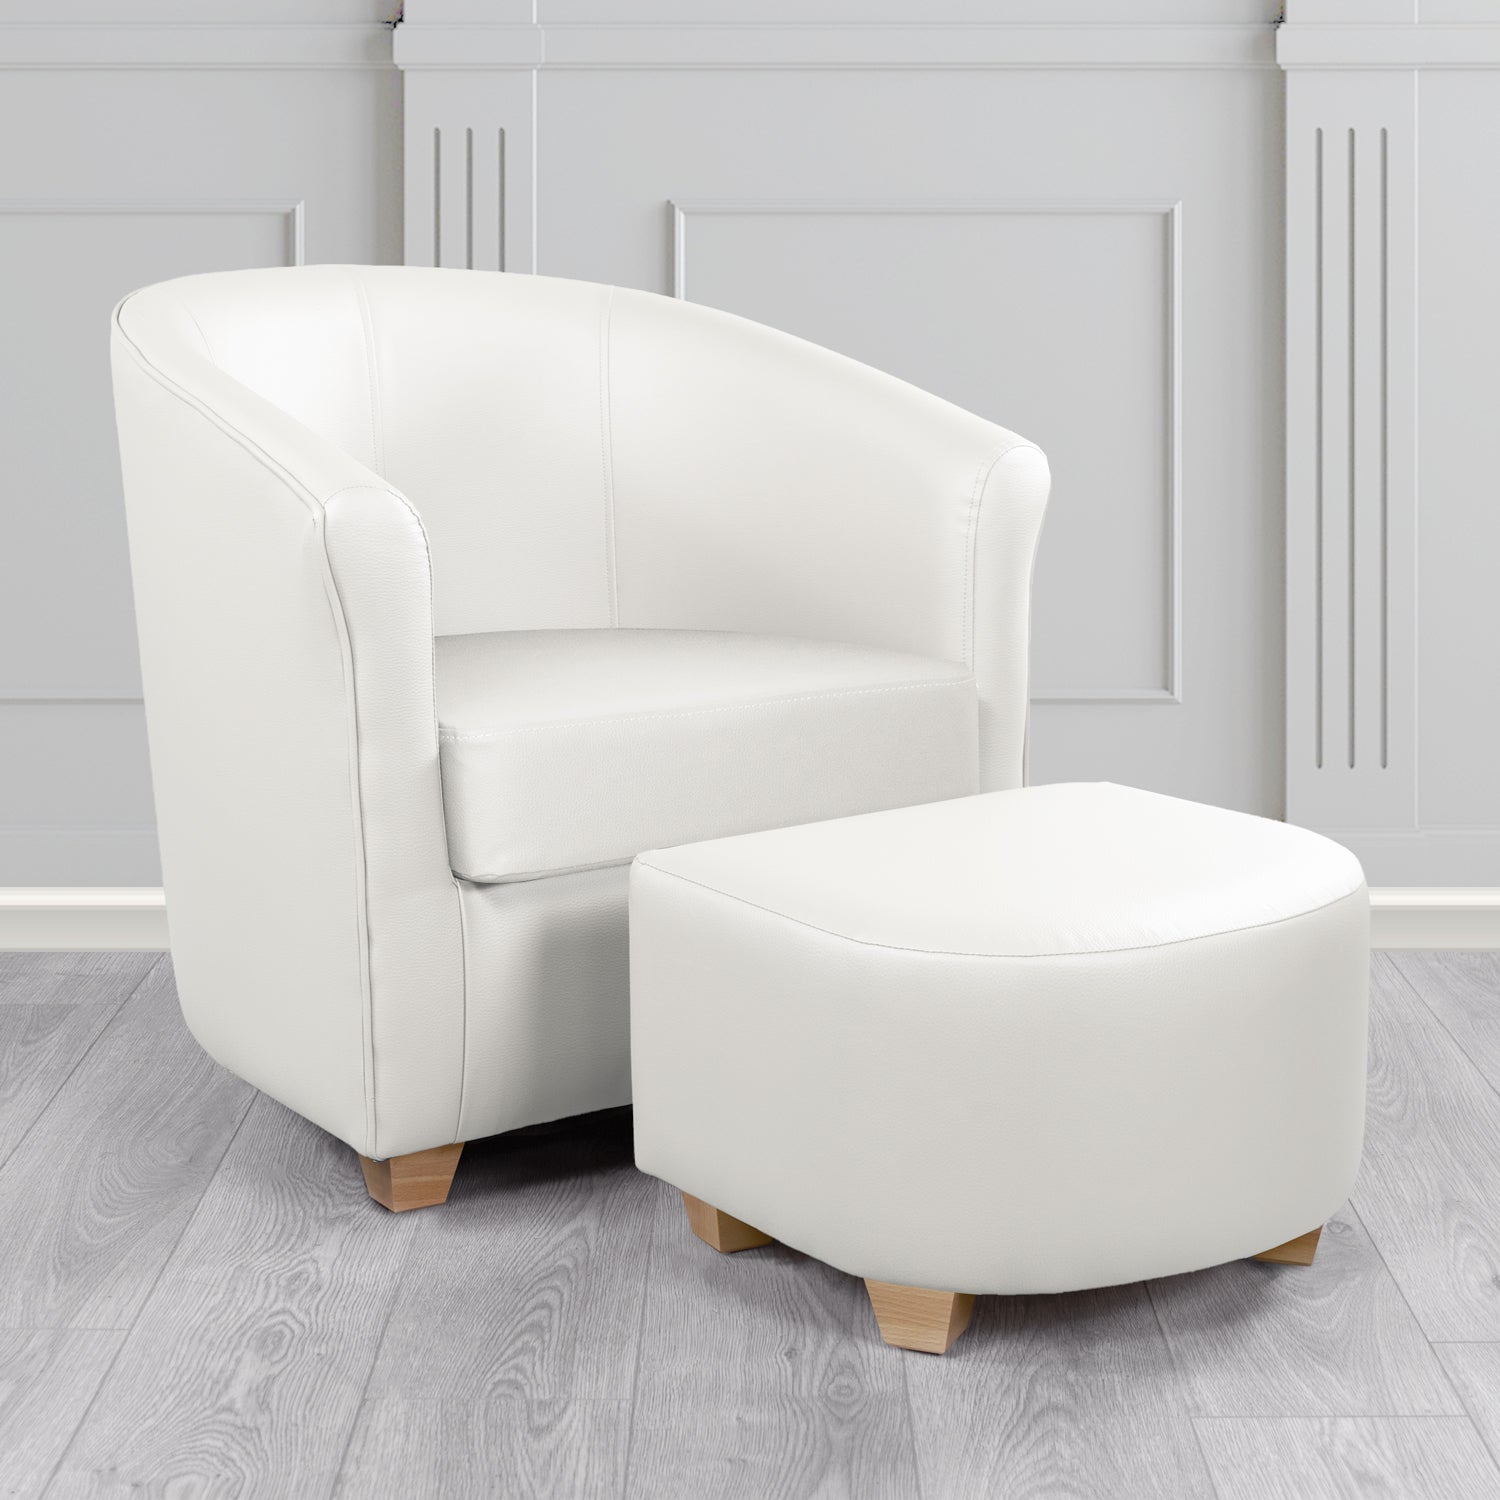 Cannes Tub Chair with Footstool Set in Just Colour Jasmine White Crib 5 Faux Leather - The Tub Chair Shop